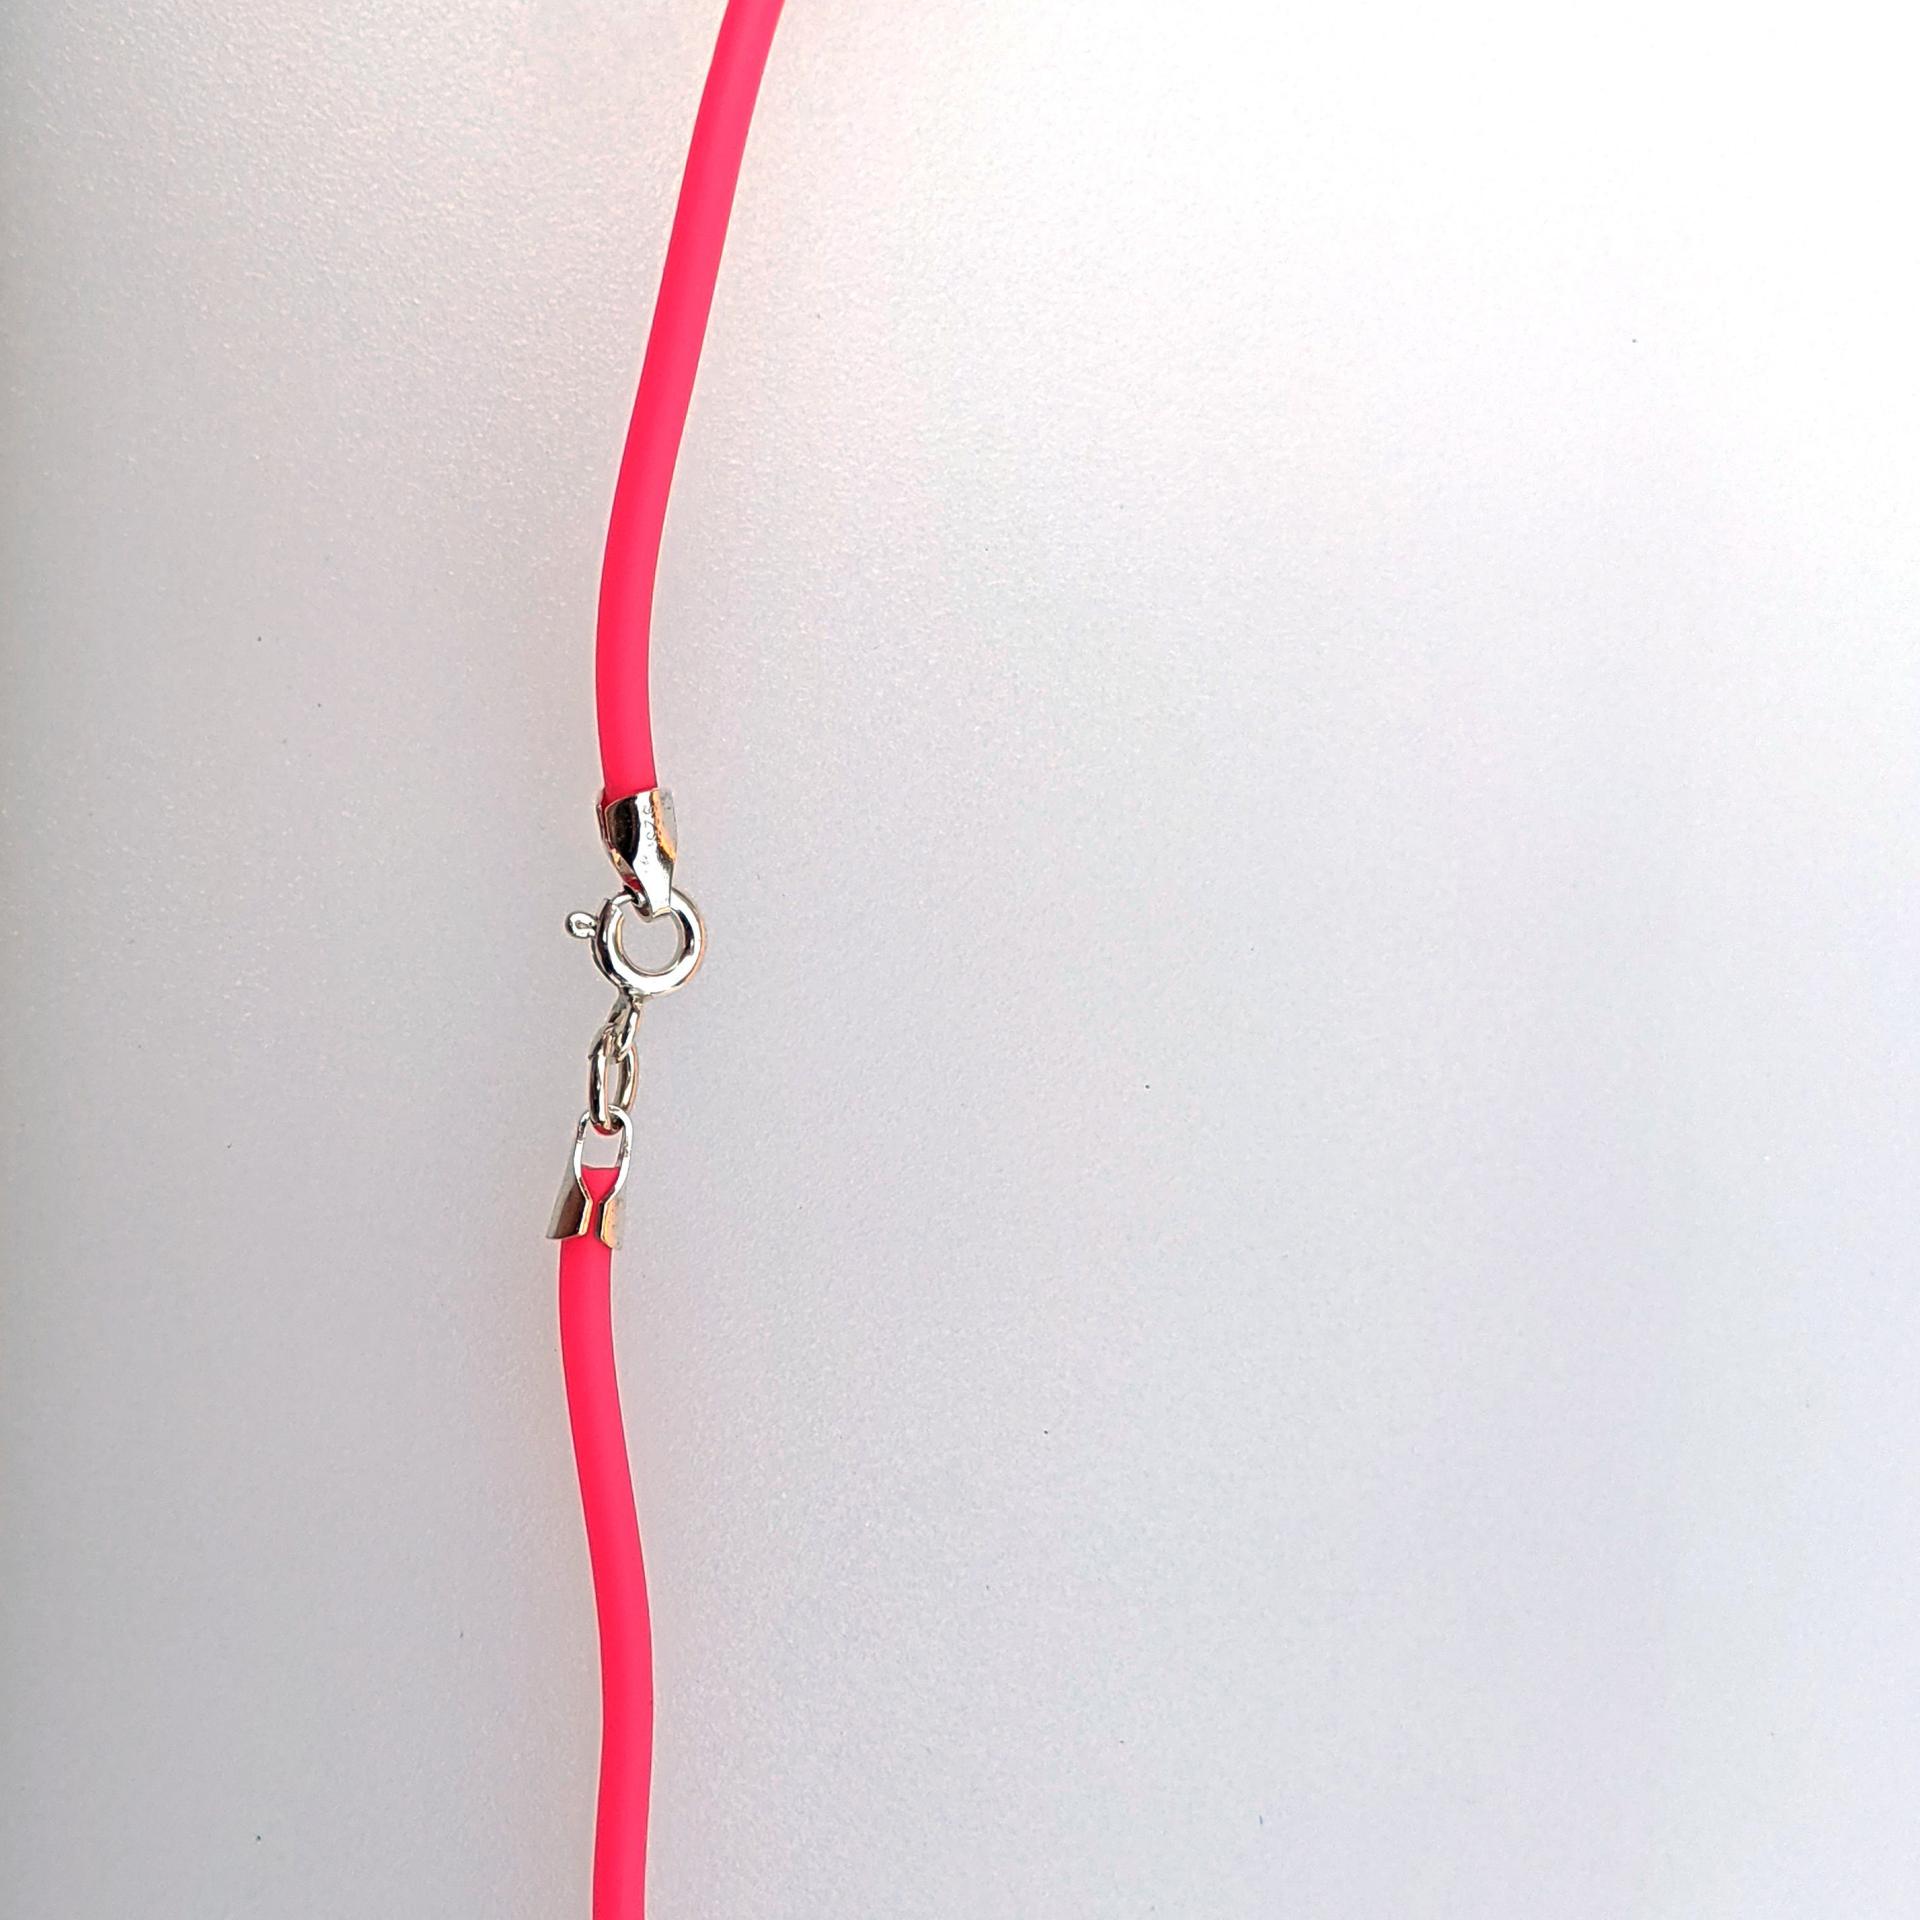 Hot Pink Rubber Cord Necklace, 2mm, Sterling Clasp, Interchangeable, 16", 18", 20", 22", 24"